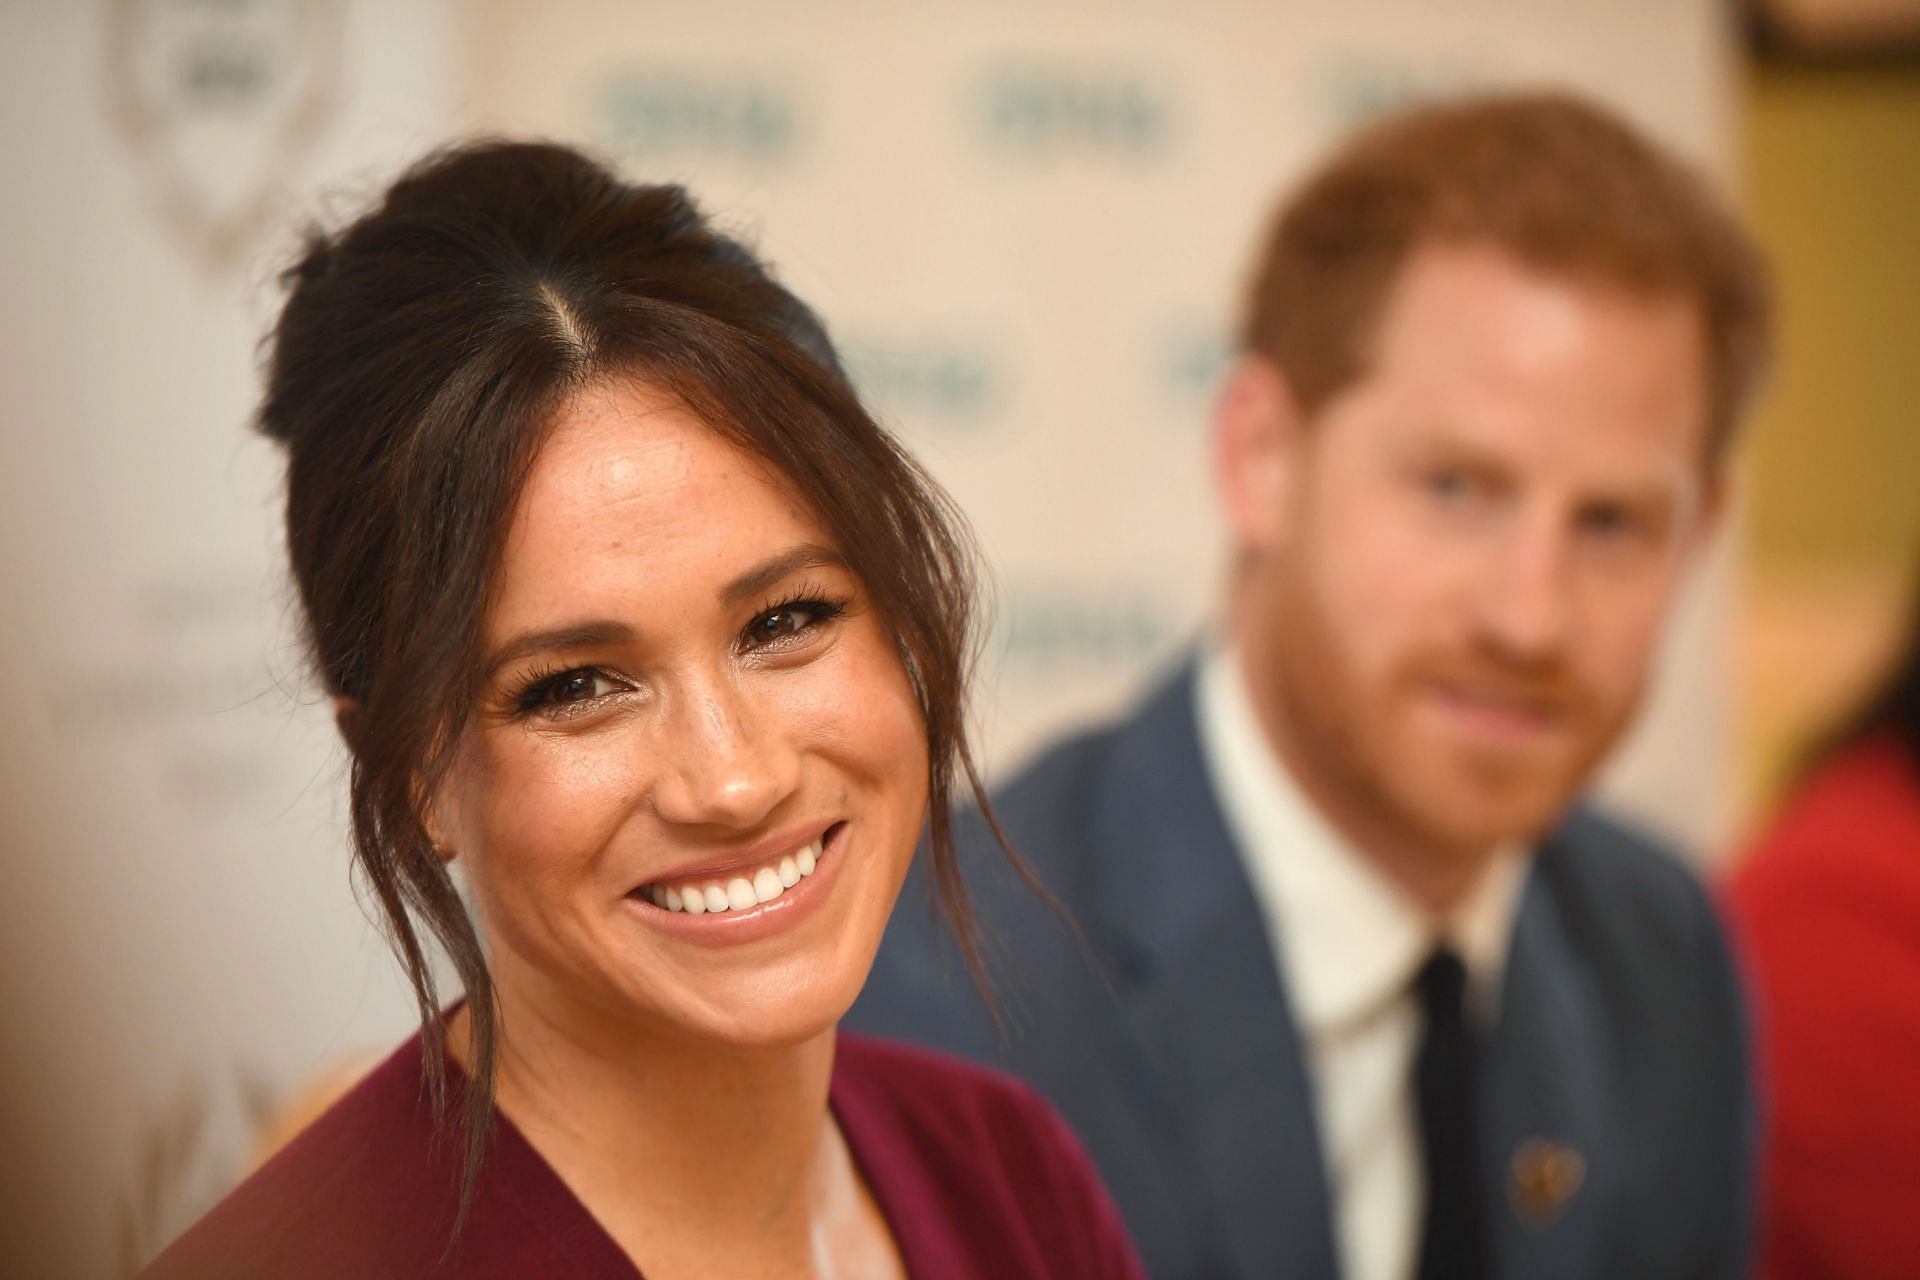 The Duchess of Sussex at Roundtable Discussion on Gender Equality (Image via Getty)